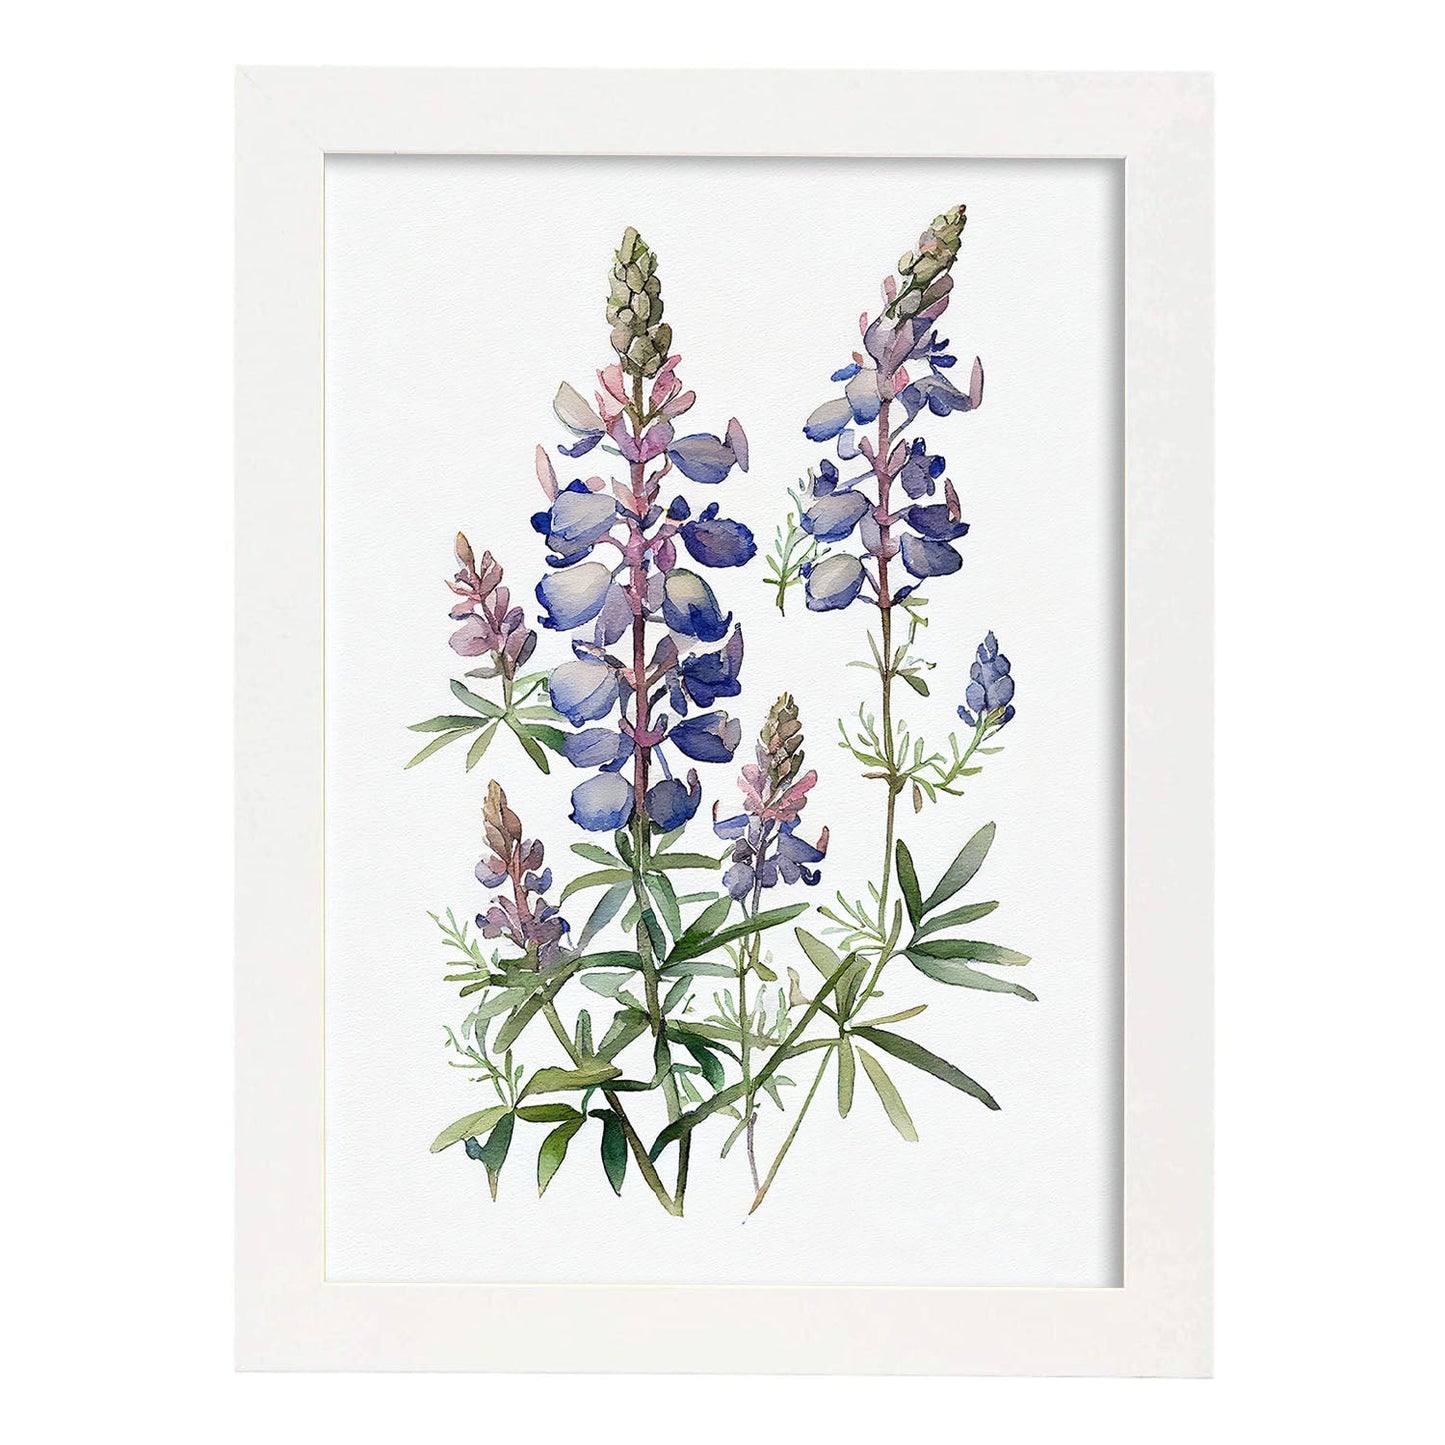 Nacnic watercolor minmal Bluebonnet_2. Aesthetic Wall Art Prints for Bedroom or Living Room Design.